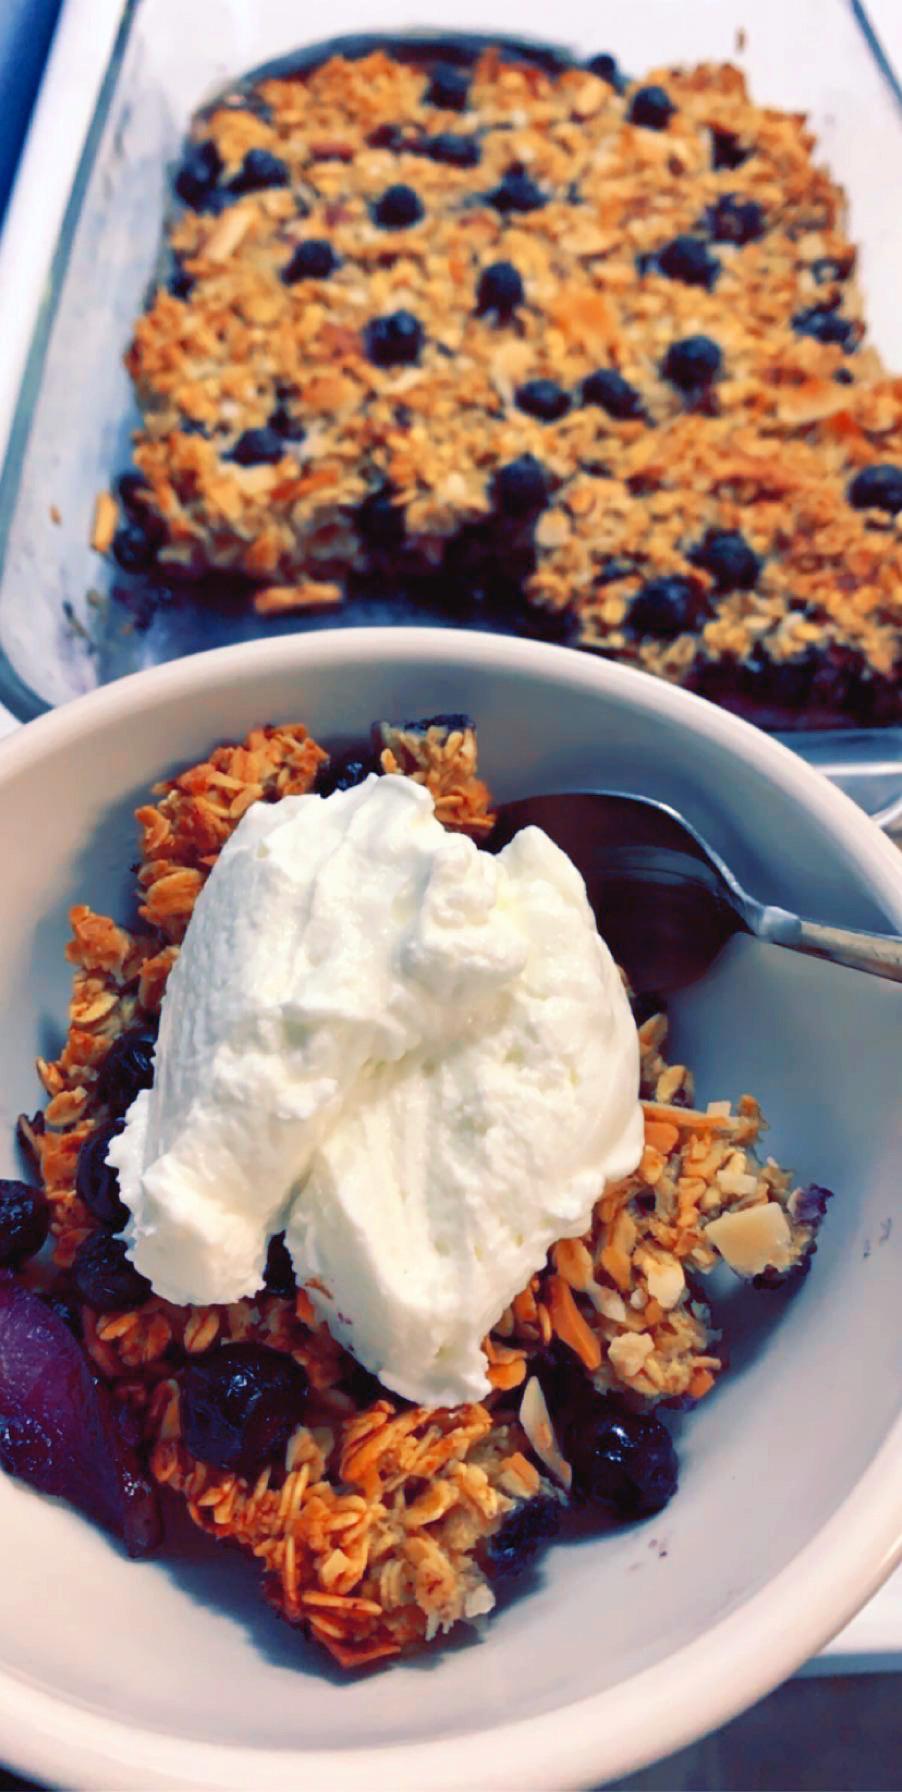 With no flour or sugar, Sofia has been baking lots of “crisp/crumble” recipes with oats.